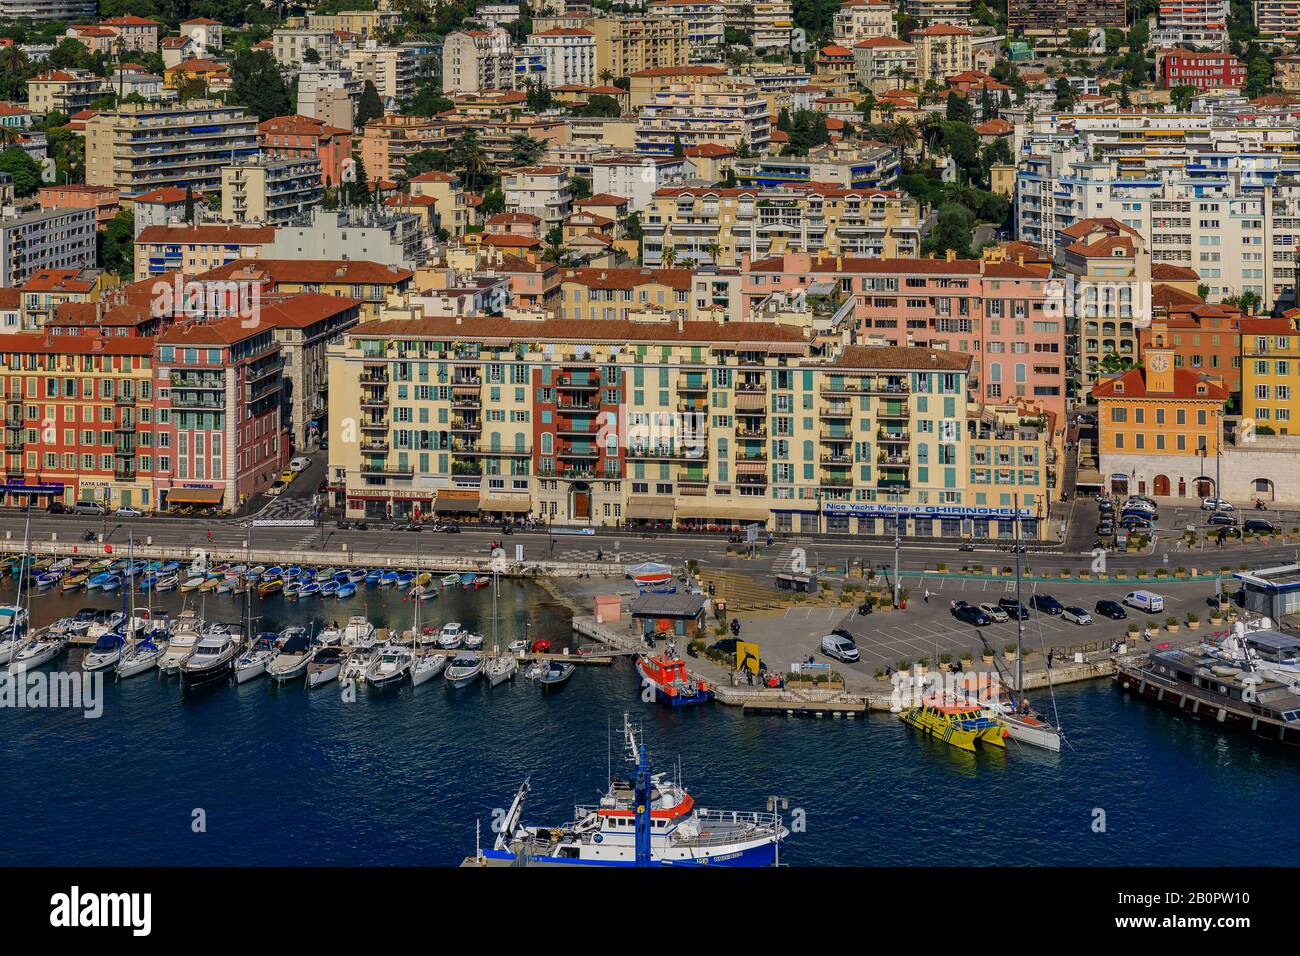 Nice, France - May 25, 2019: View of boats, coastline and traditional houses in Lympia port on the Mediterranean Sea, Cote d'Azur in Nice, France Stock Photo